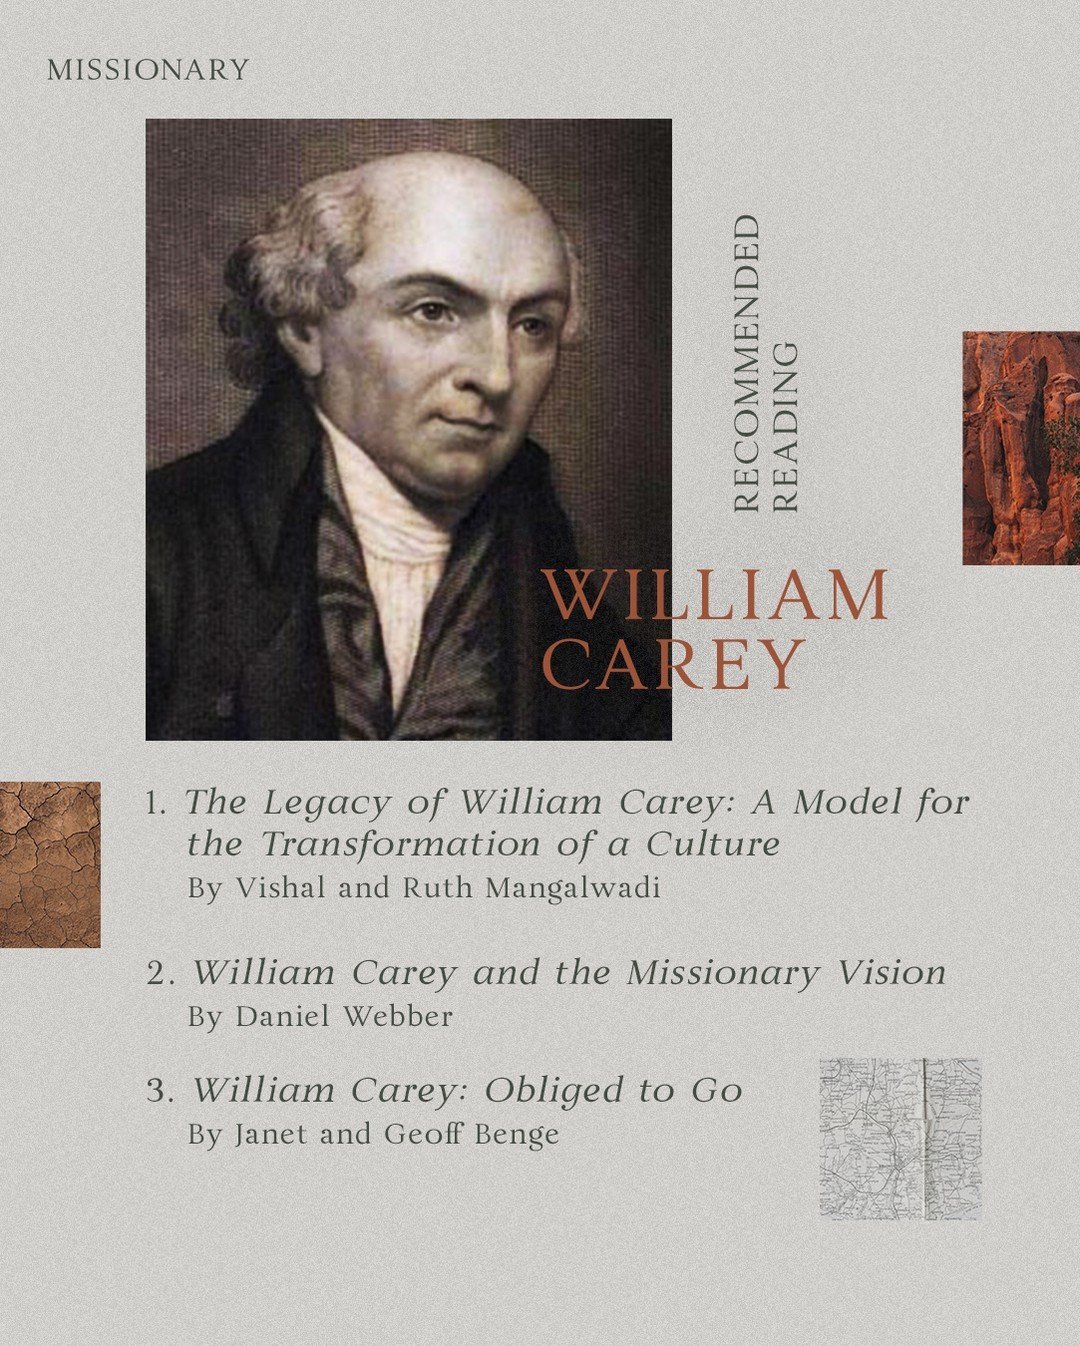 William Carey left his home in England in 1793 to serve as a missionary in India, where he would remain for the rest of his life. He helped establish the Baptist Missionary Society and translated the Bible into Bengali, Oriya, Marathi, Hindi, Assames